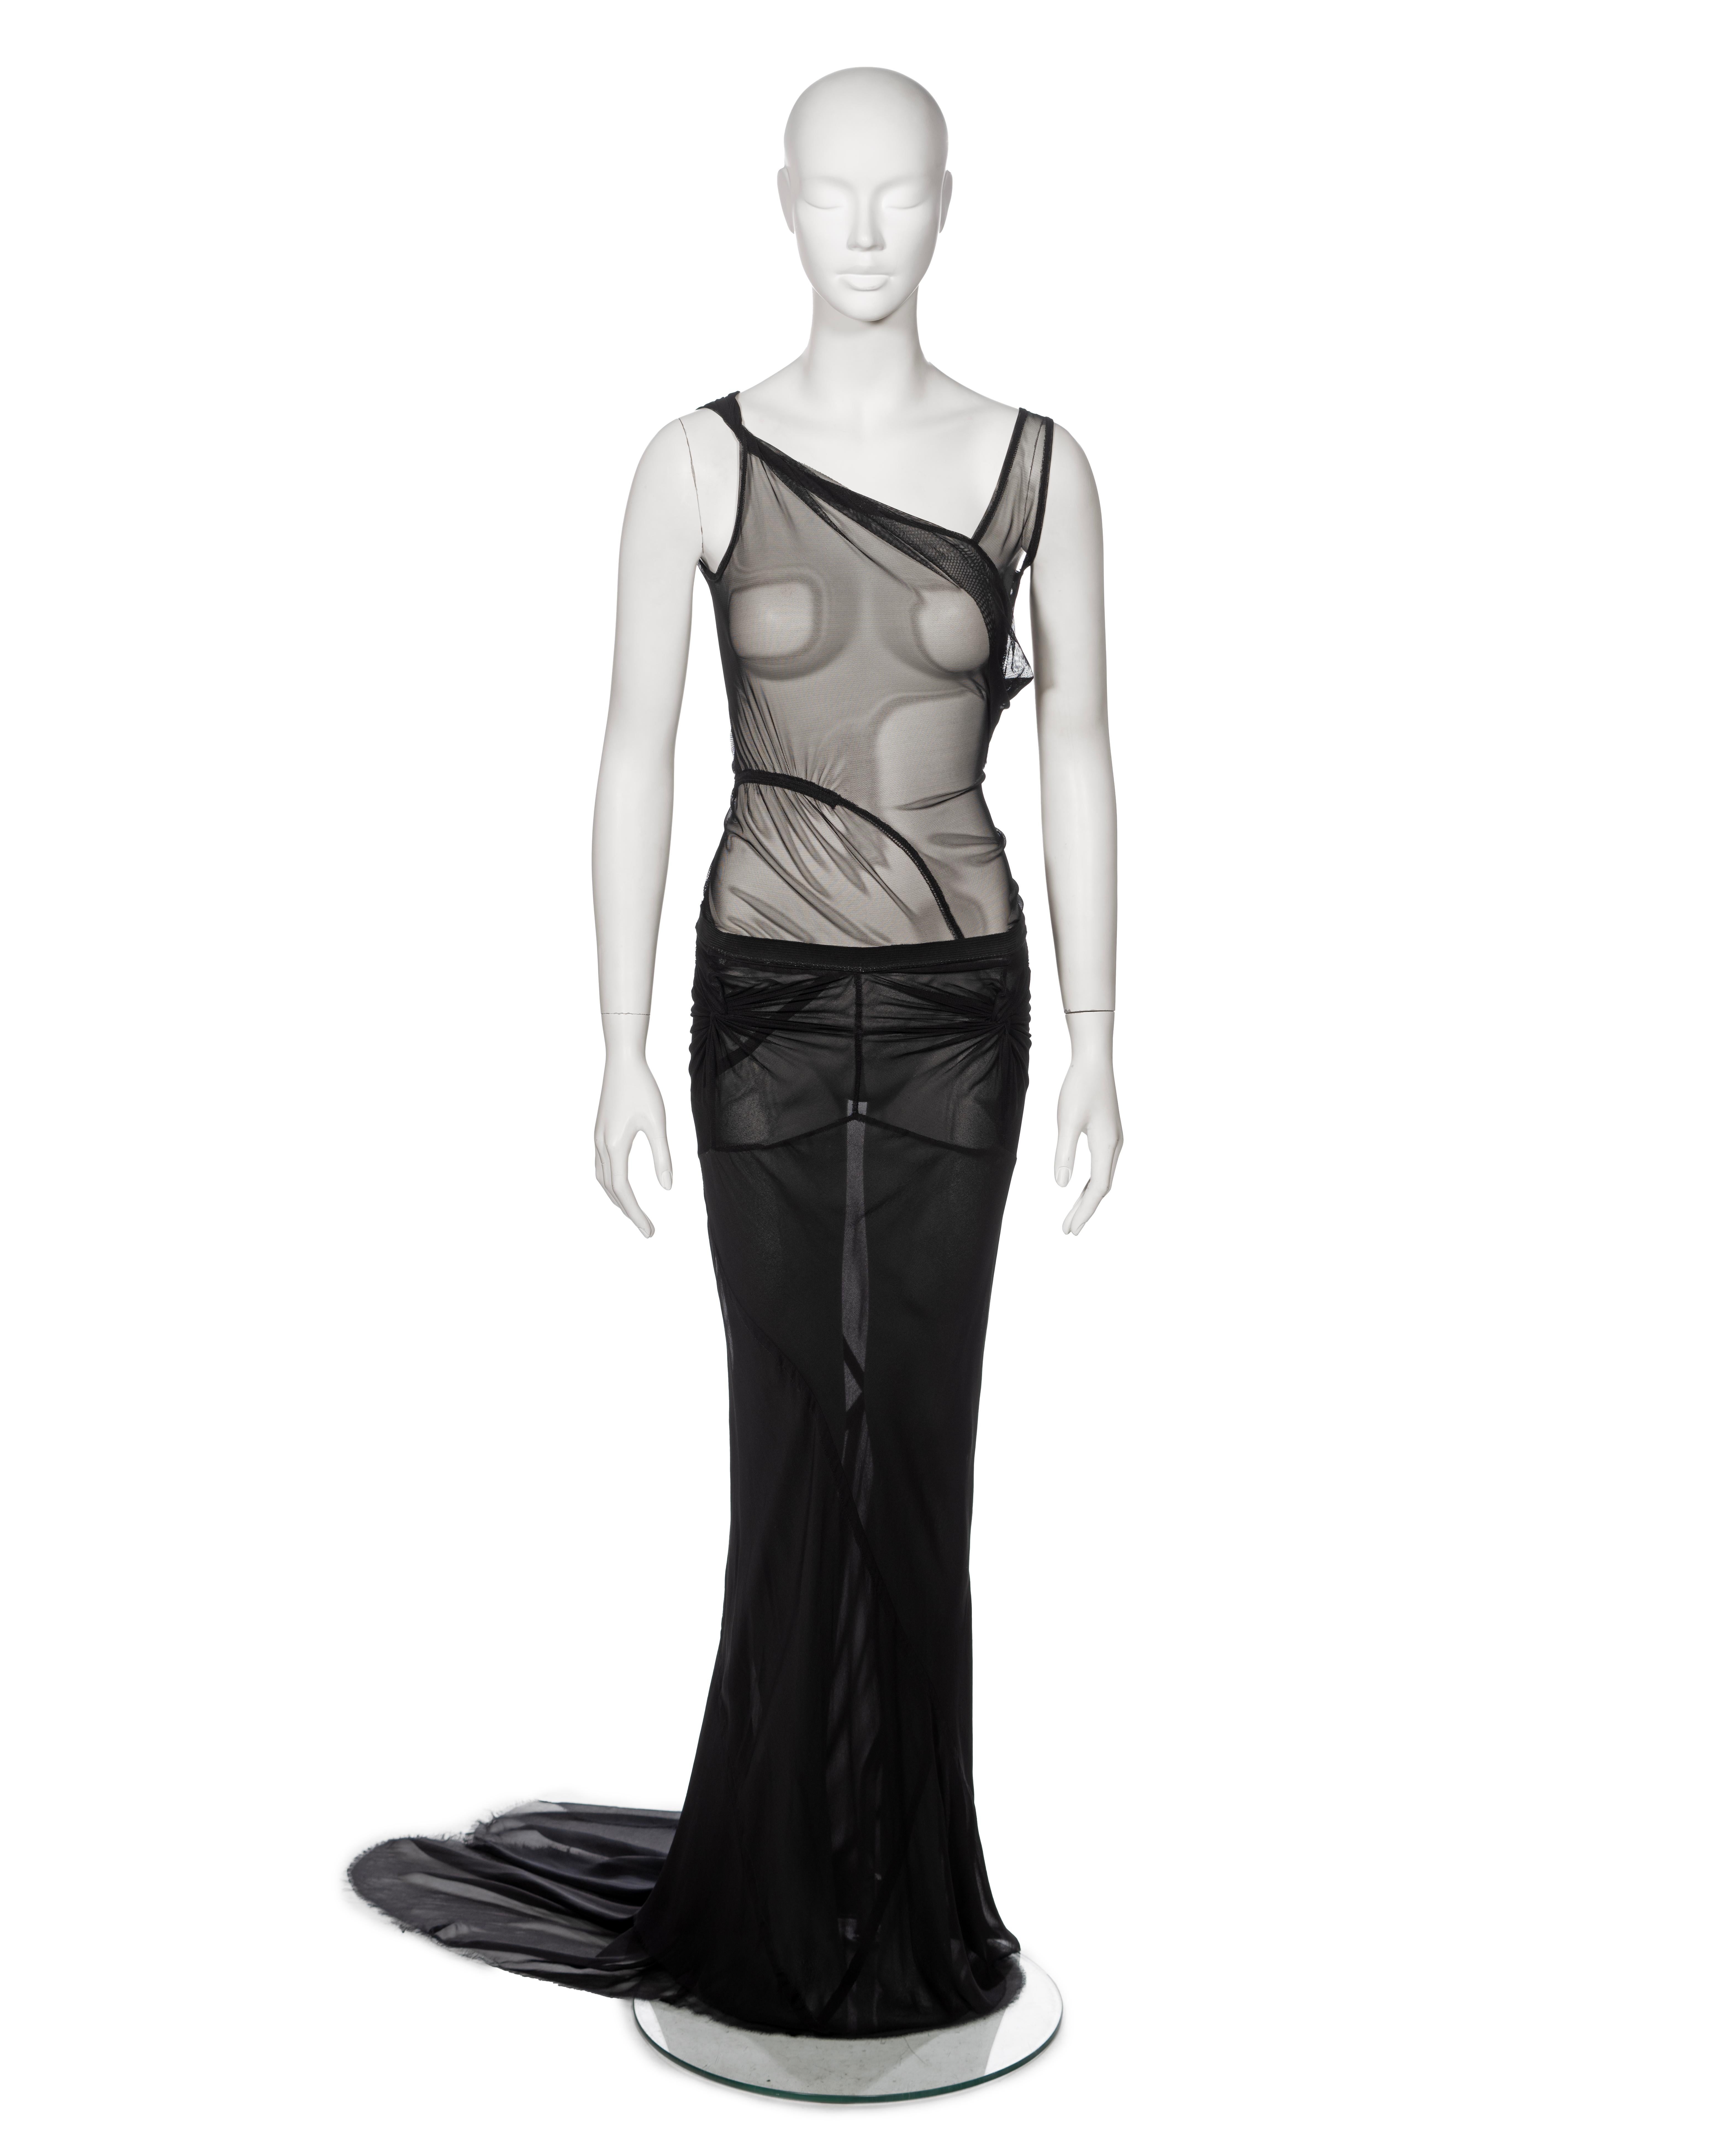 ▪ Archival Rick Owens 'Elektra' Dress and Skirt Ensemble
▪ Spring-Summer 1999
▪ Sold by One of a Kind Archive
▪ Museum Grade 
▪ This evening ensemble comprises an evening dress and a trained maxi skirt
▪ The floor-length dress, fashioned from